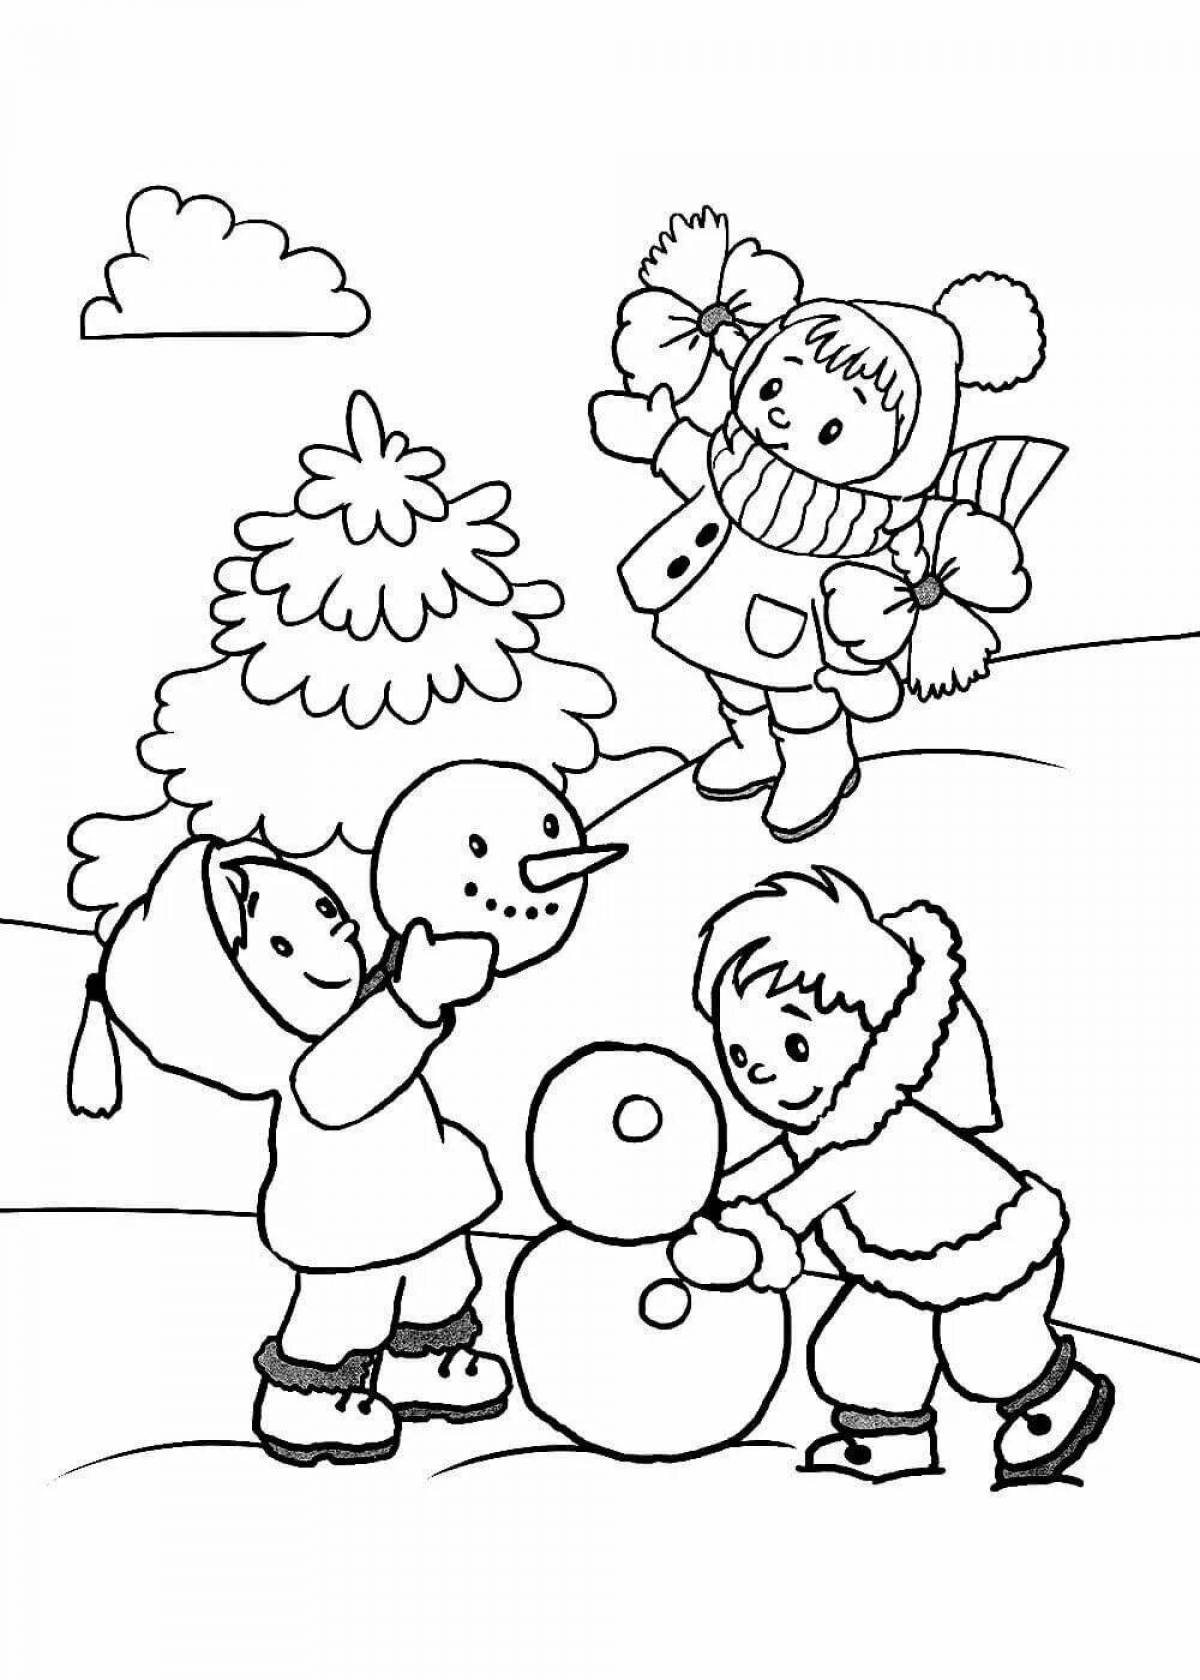 Exotic coloring book winter fun for kids